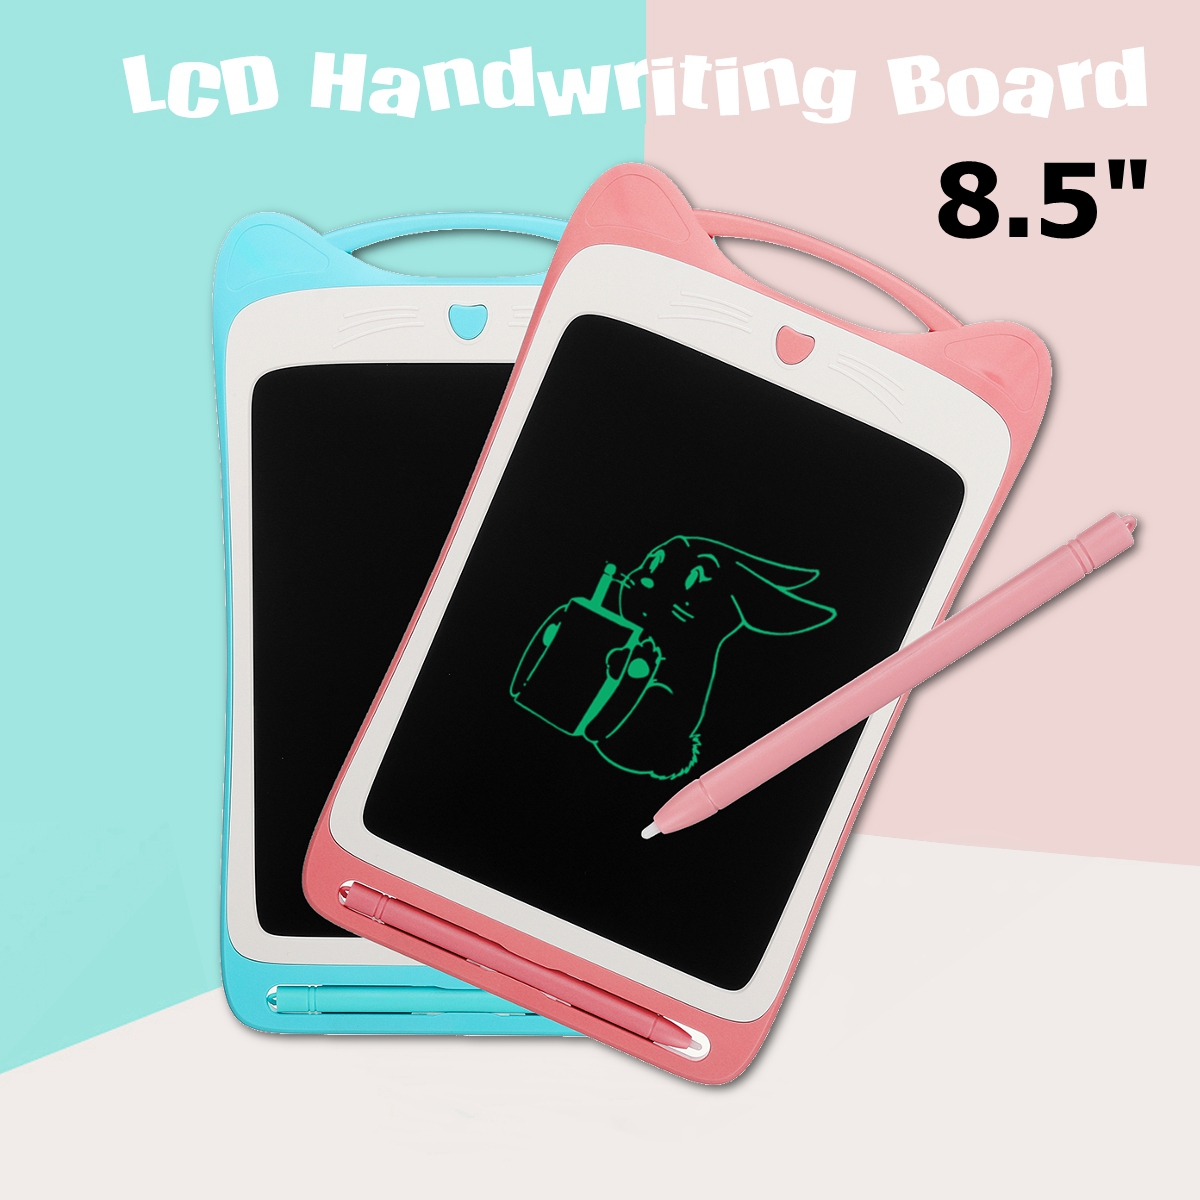 85-inch-LCD-Handwriting-Board-Erasing-Childrens-Writing-Table-Thick-Pen-Highlighting-Electronic-Graf-1637718-1